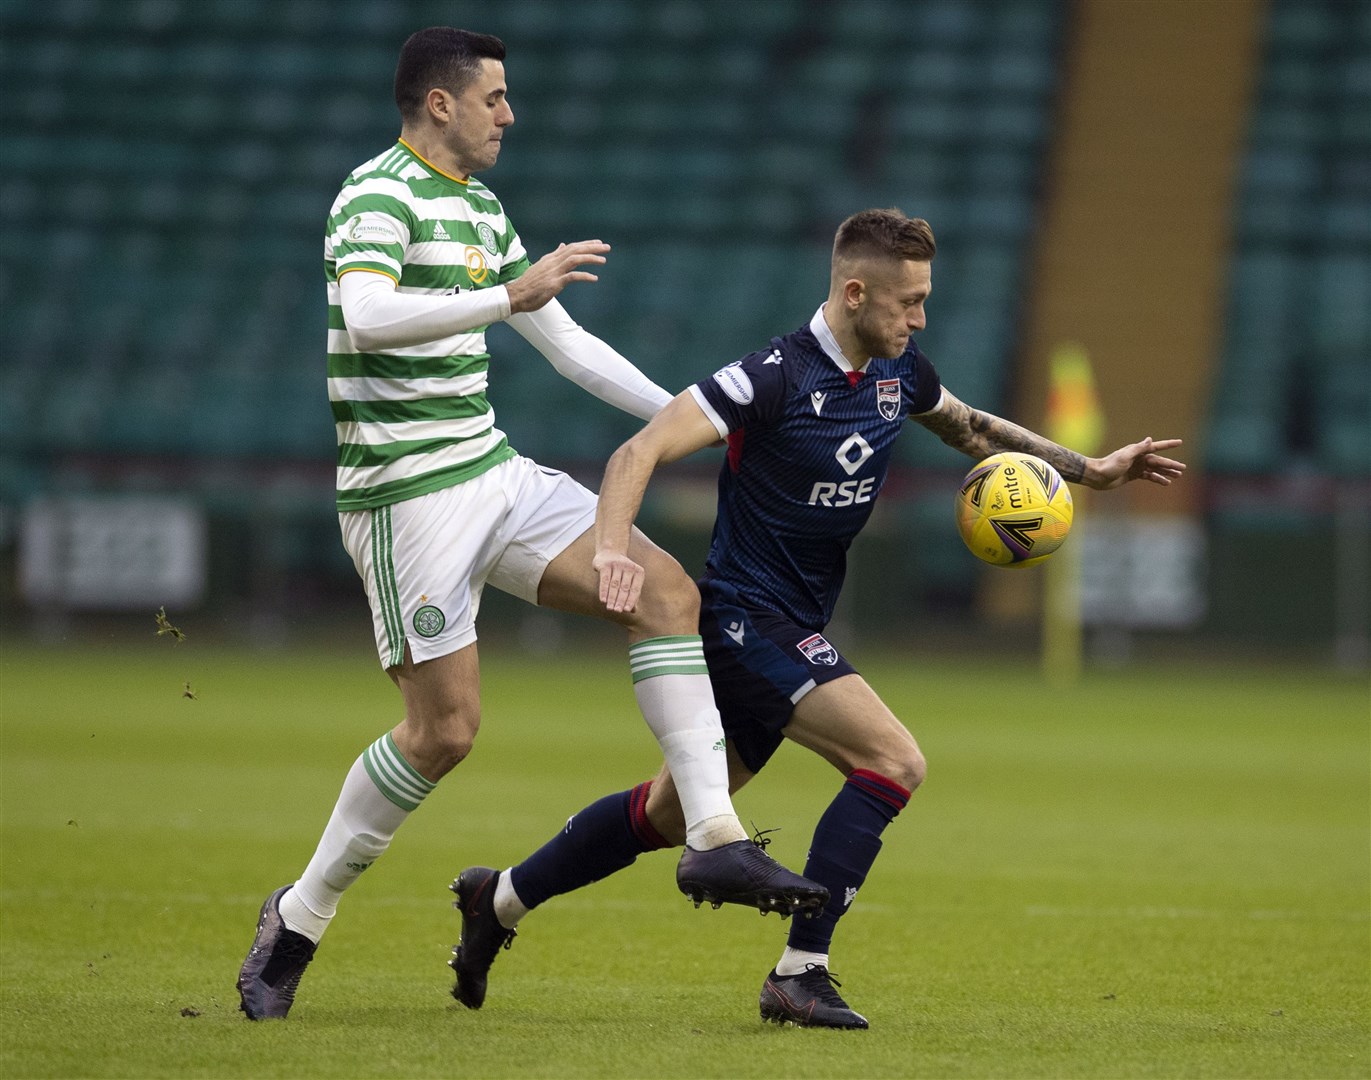 Injuries will force changes at Ross County for Rangers match after Celtic victory